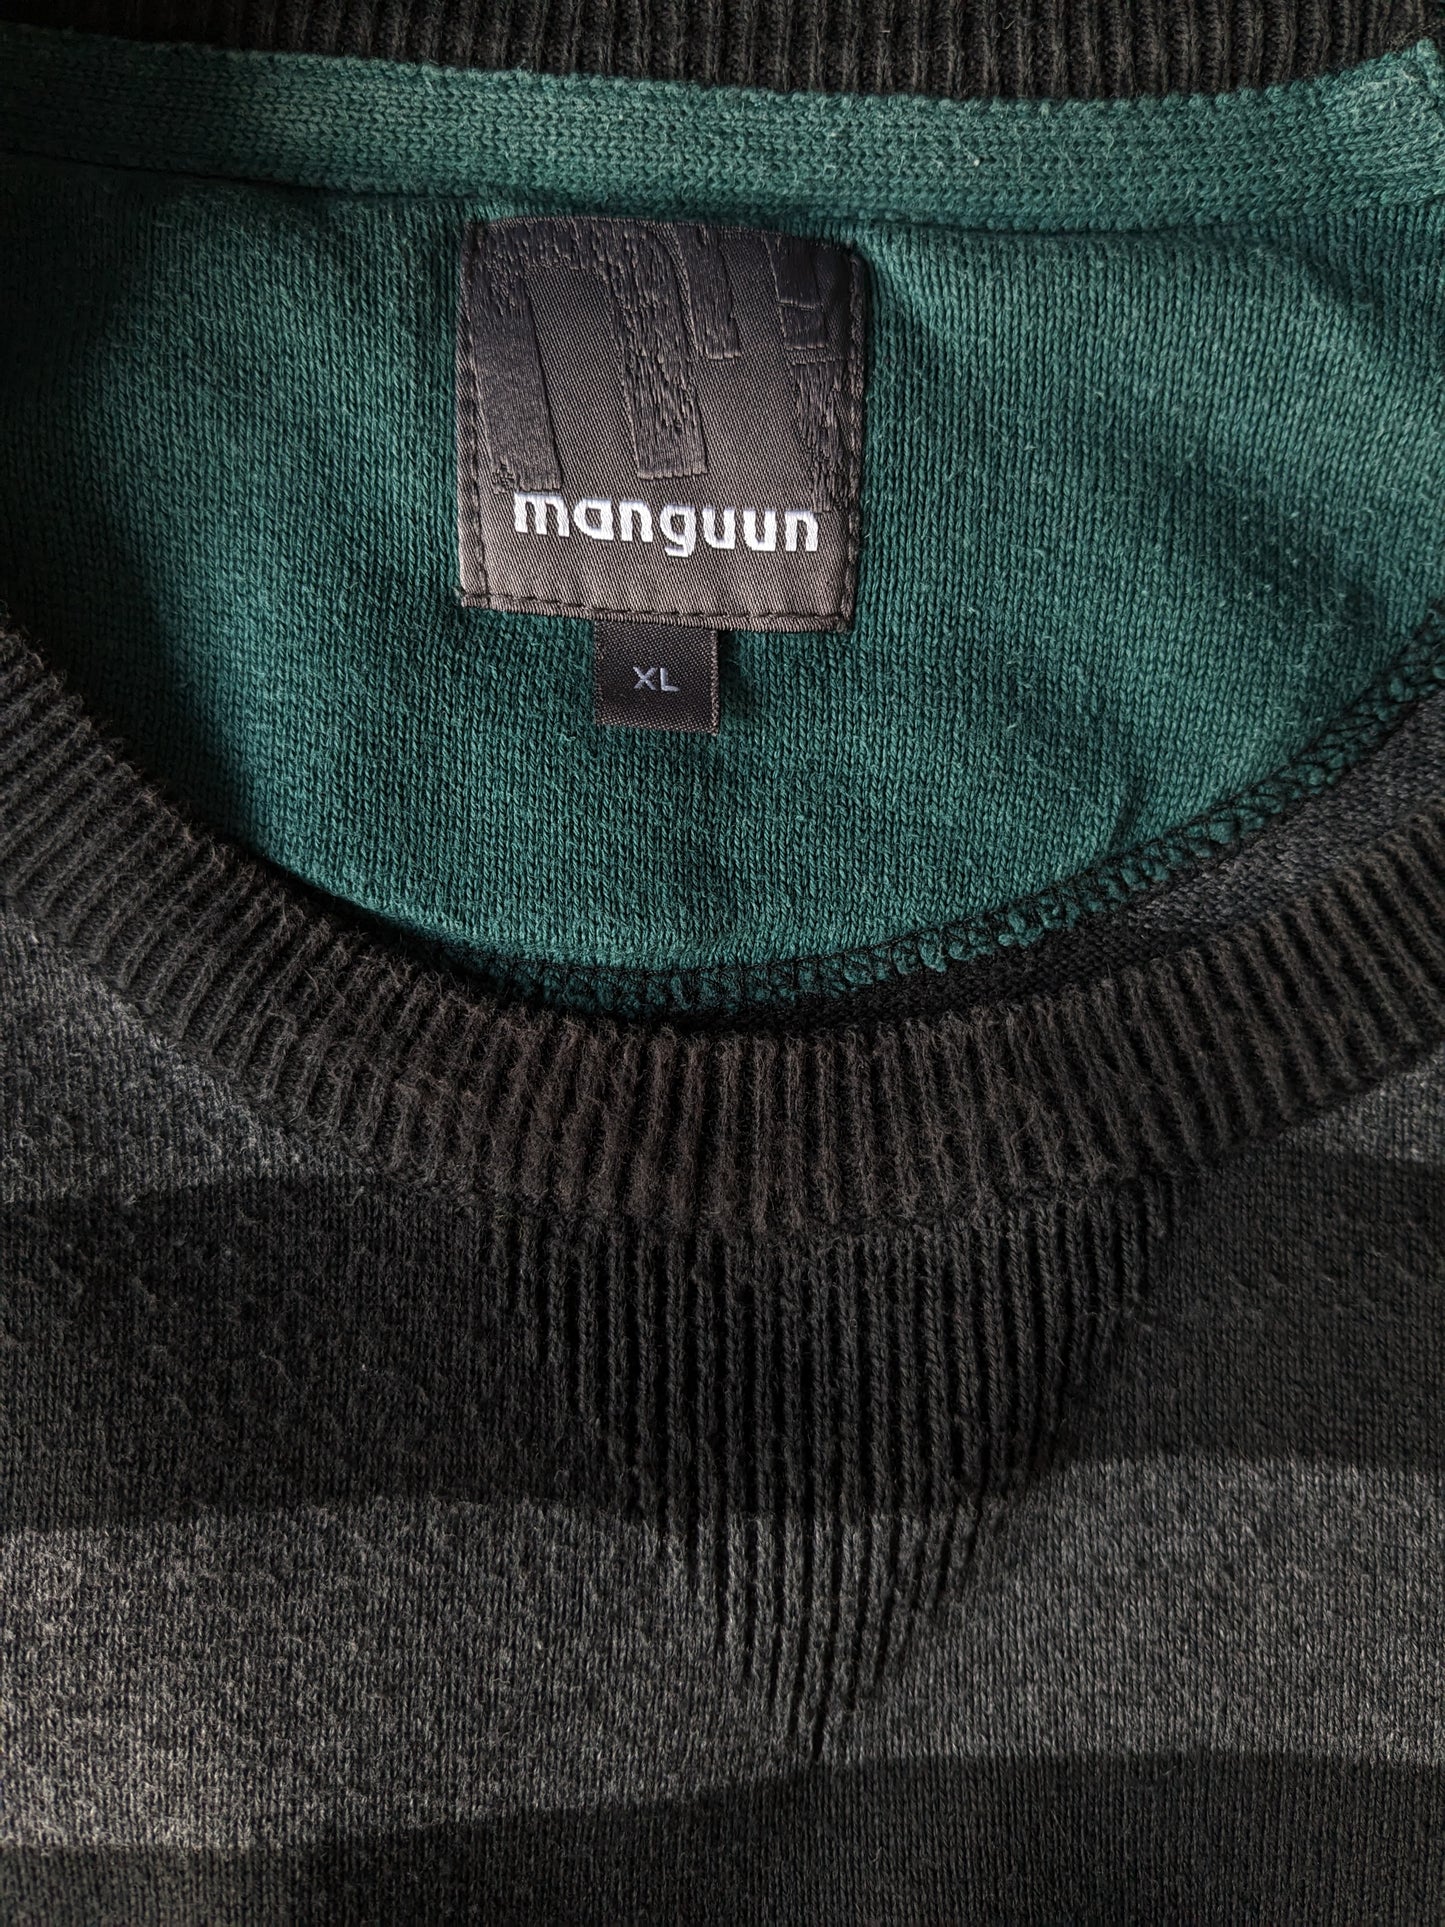 Manguun Casual sweater with elbow strokes. Black gray striped. Size XL.